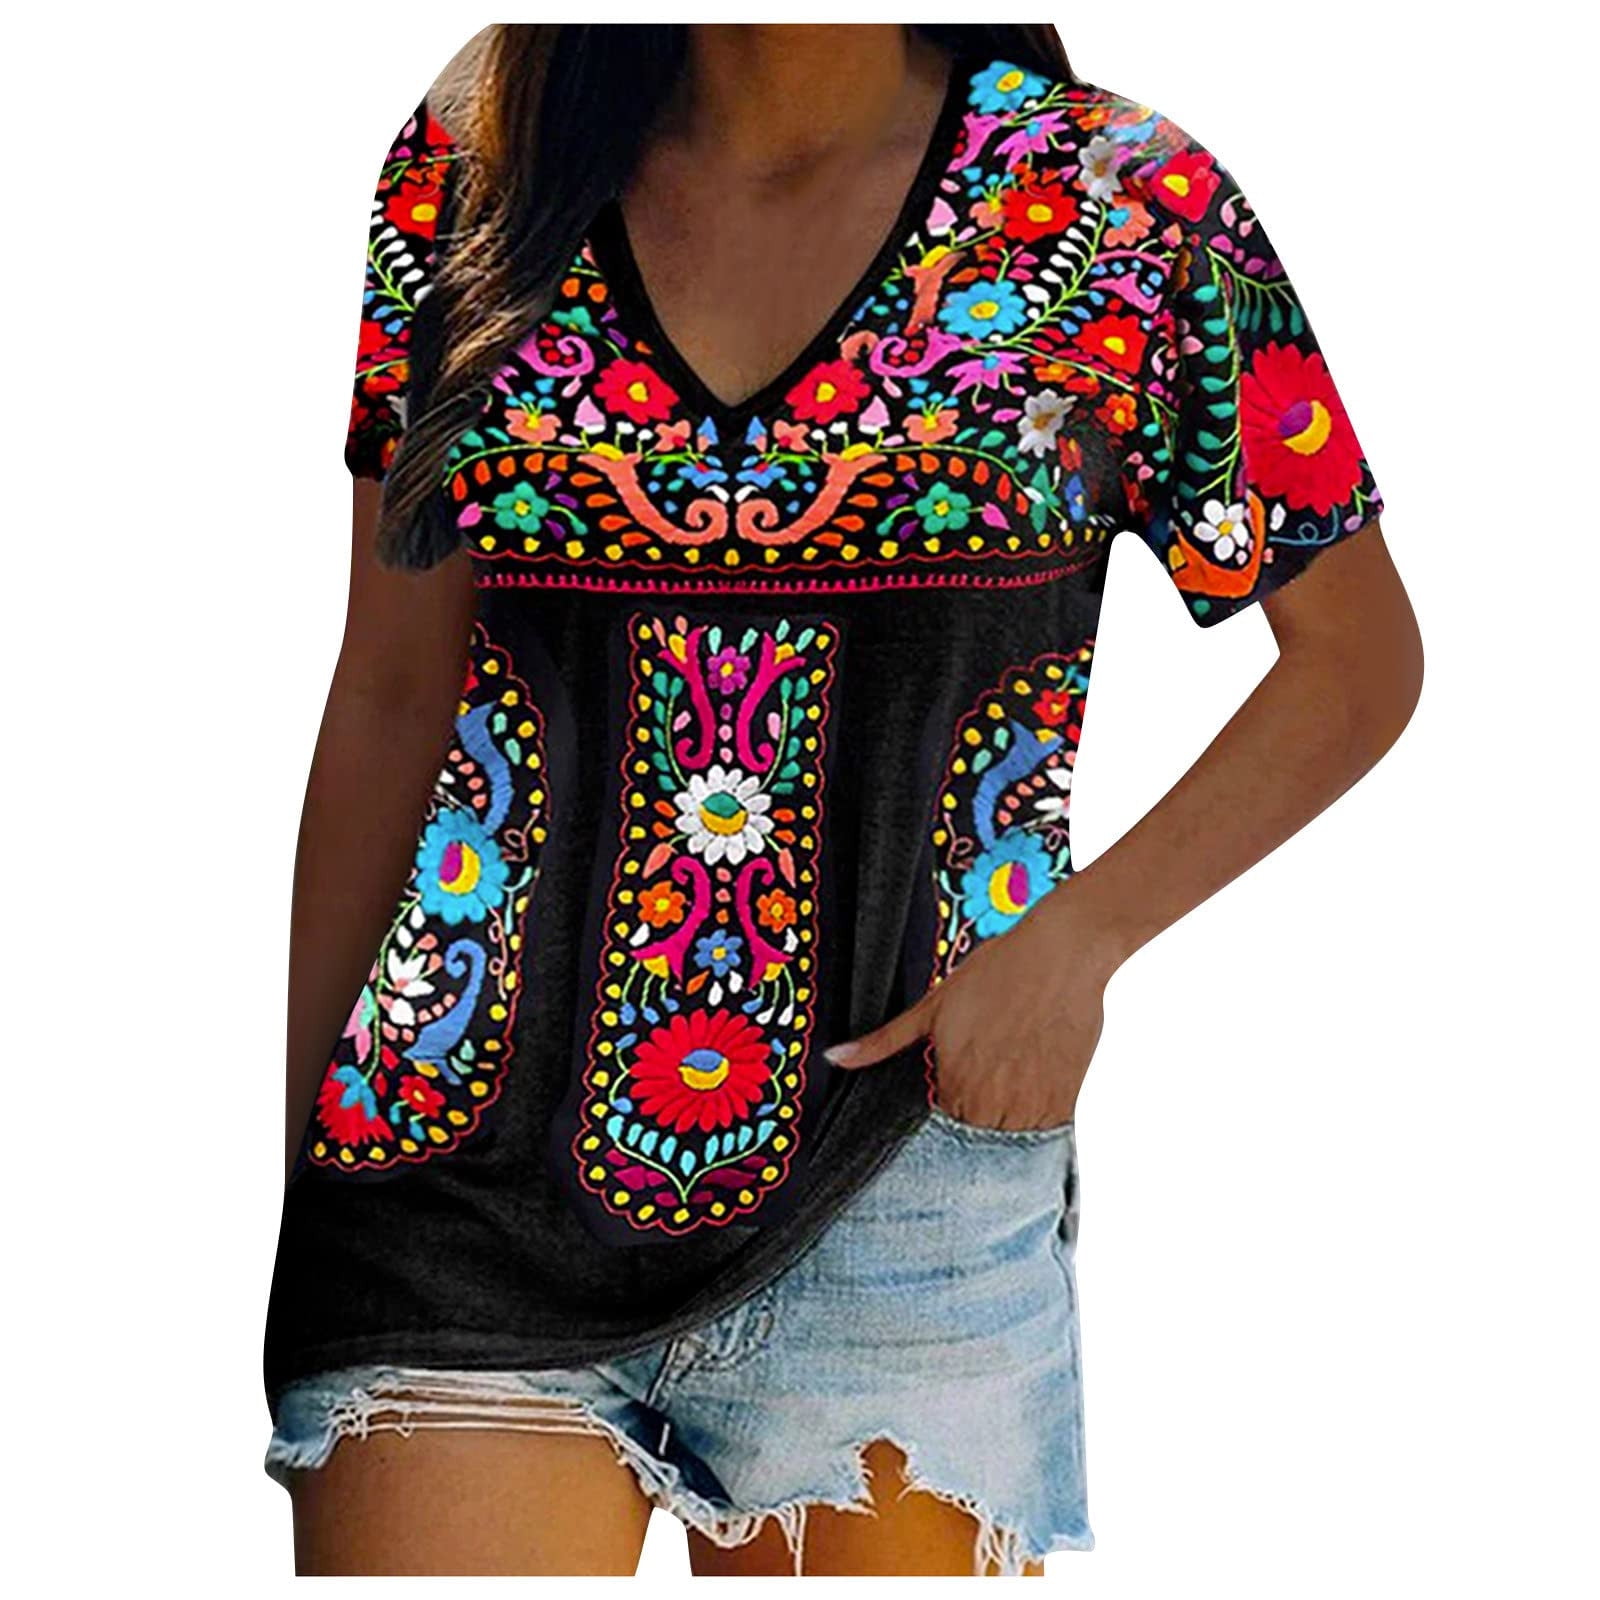 Mexican Shirts for Women Traditional Fiesta Boho Tops Peasant Blouses Short Sleeve Floral Top 